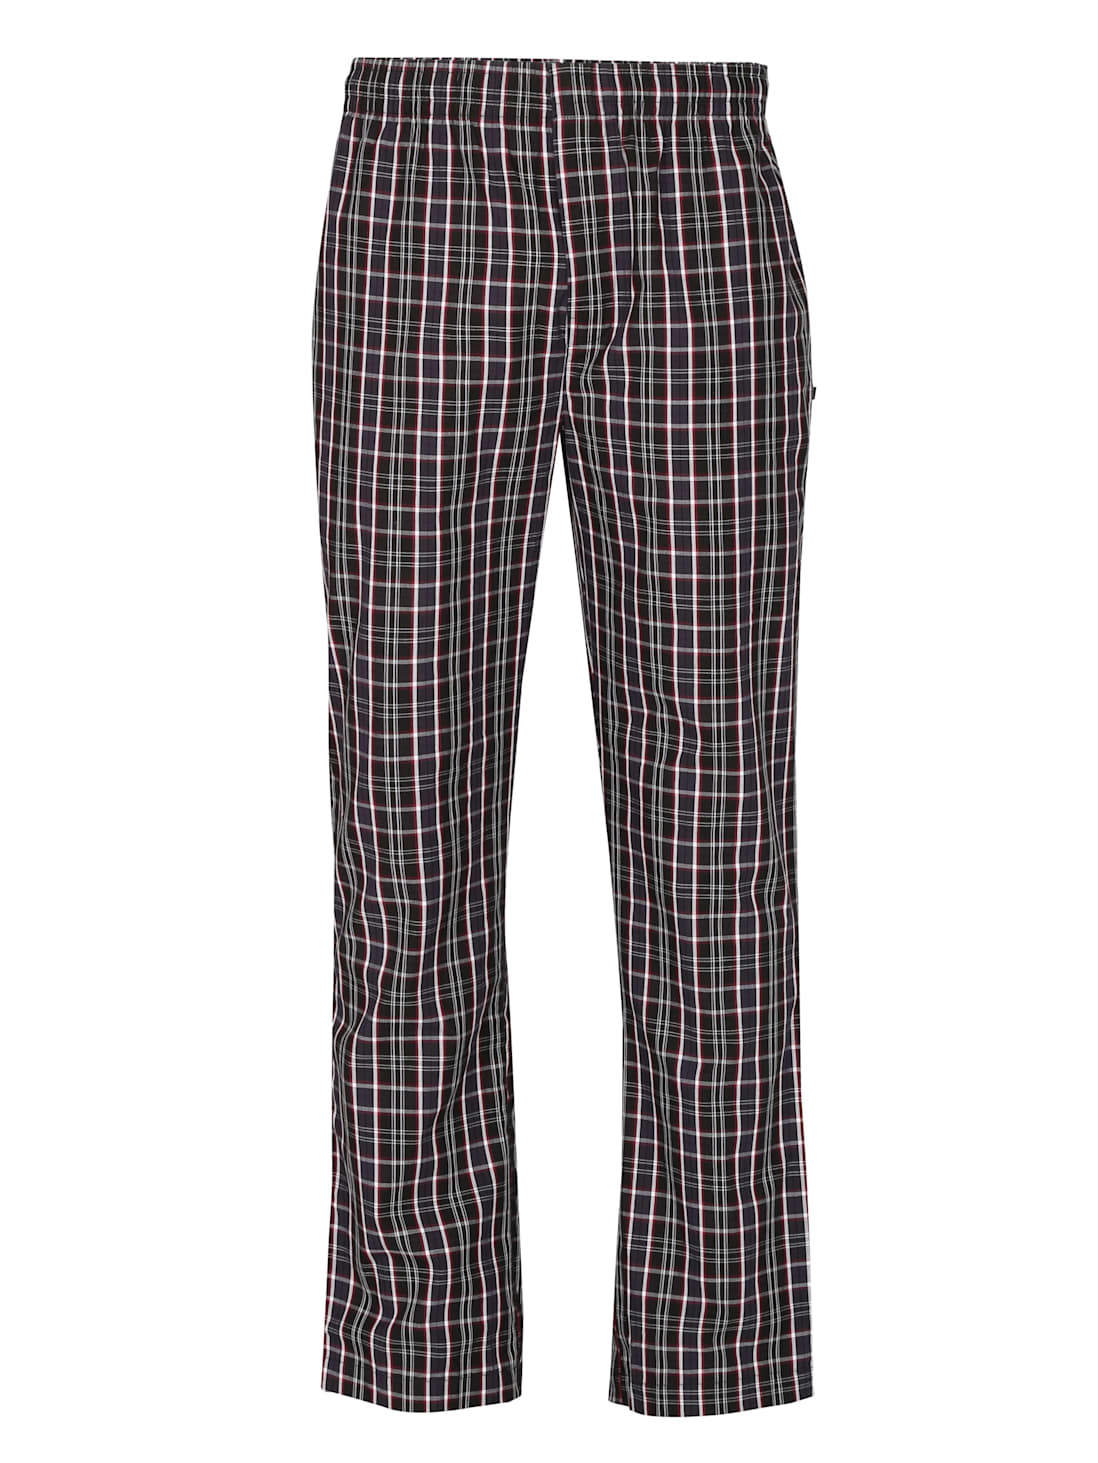 Buy Womens Super Combed Cotton Woven Fabric Relaxed Fit Checkered Pyjama  with Side Pockets  Old Rose Assorted Checks RX06  Jockey India